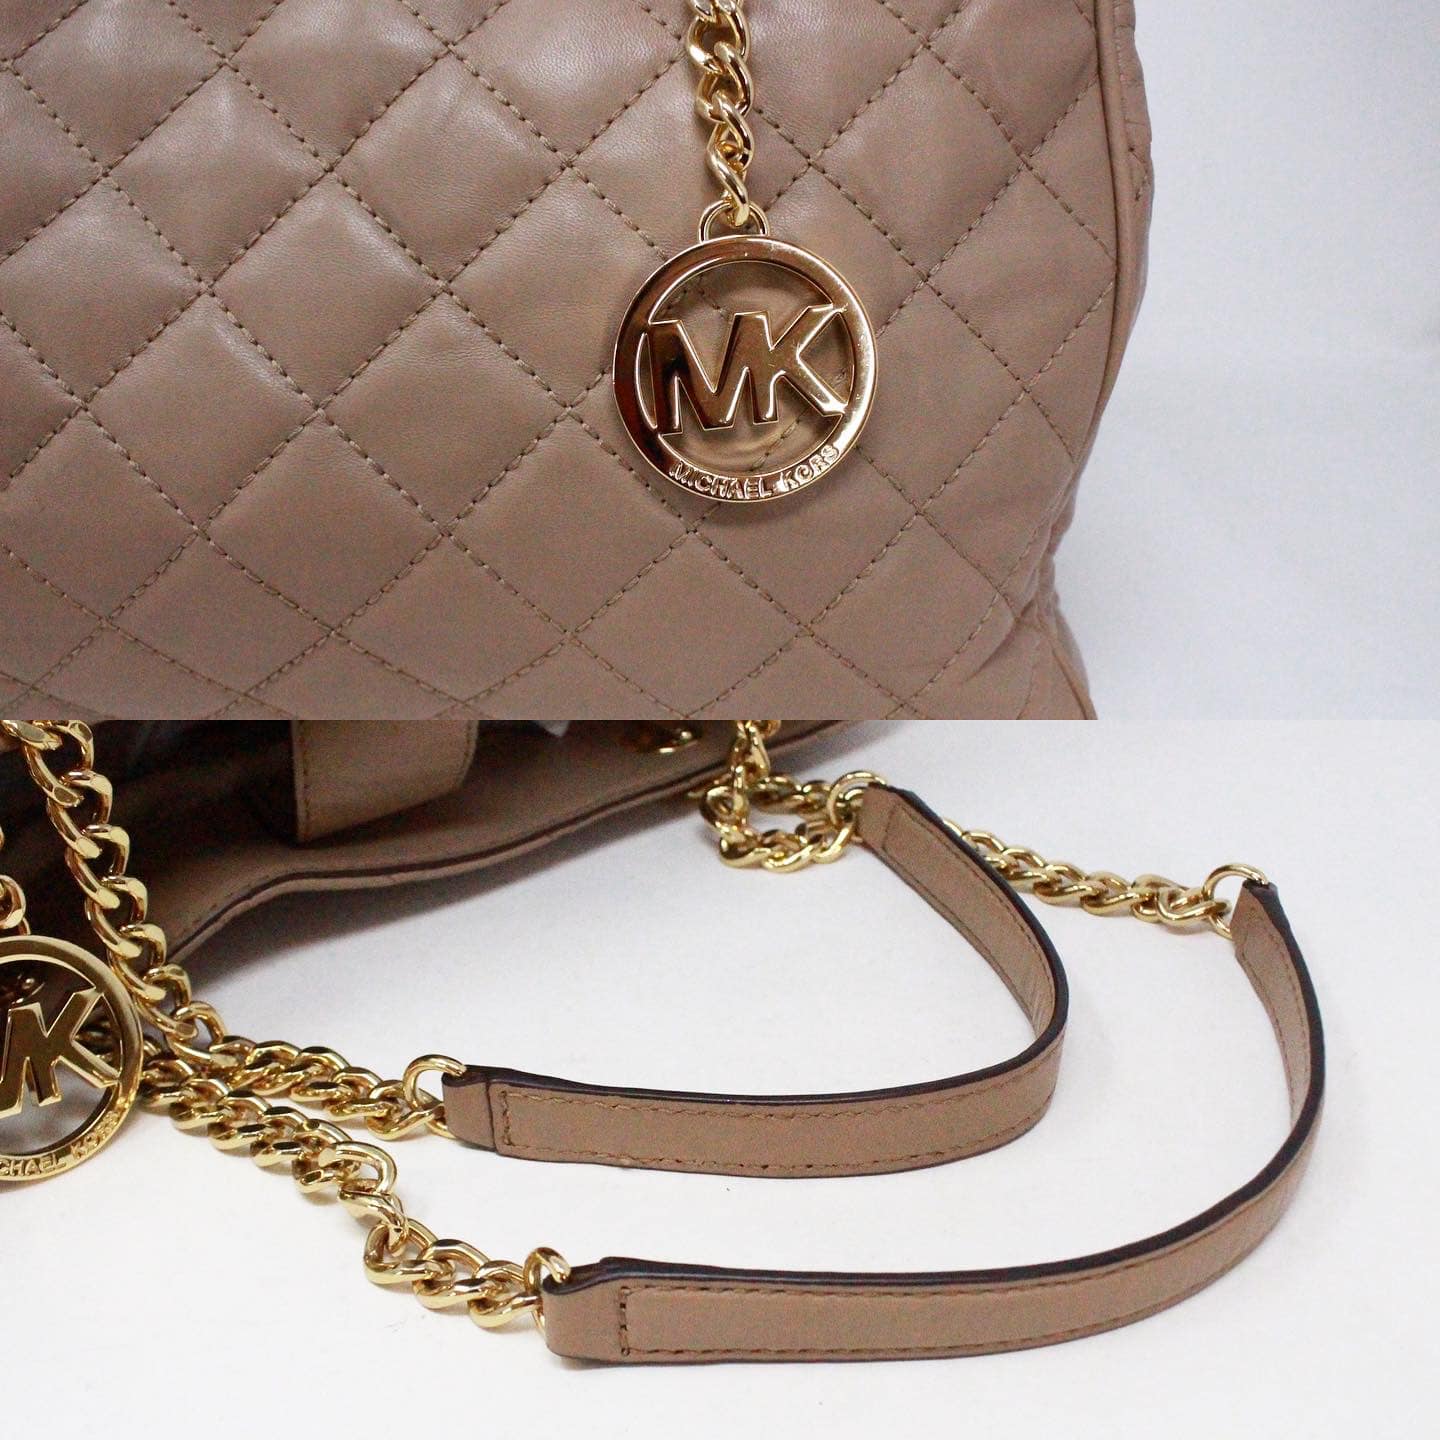 Michael Kors, Bags, Michael Kors Red Quilted Leather Shouldertote Purse  With Gold Chain